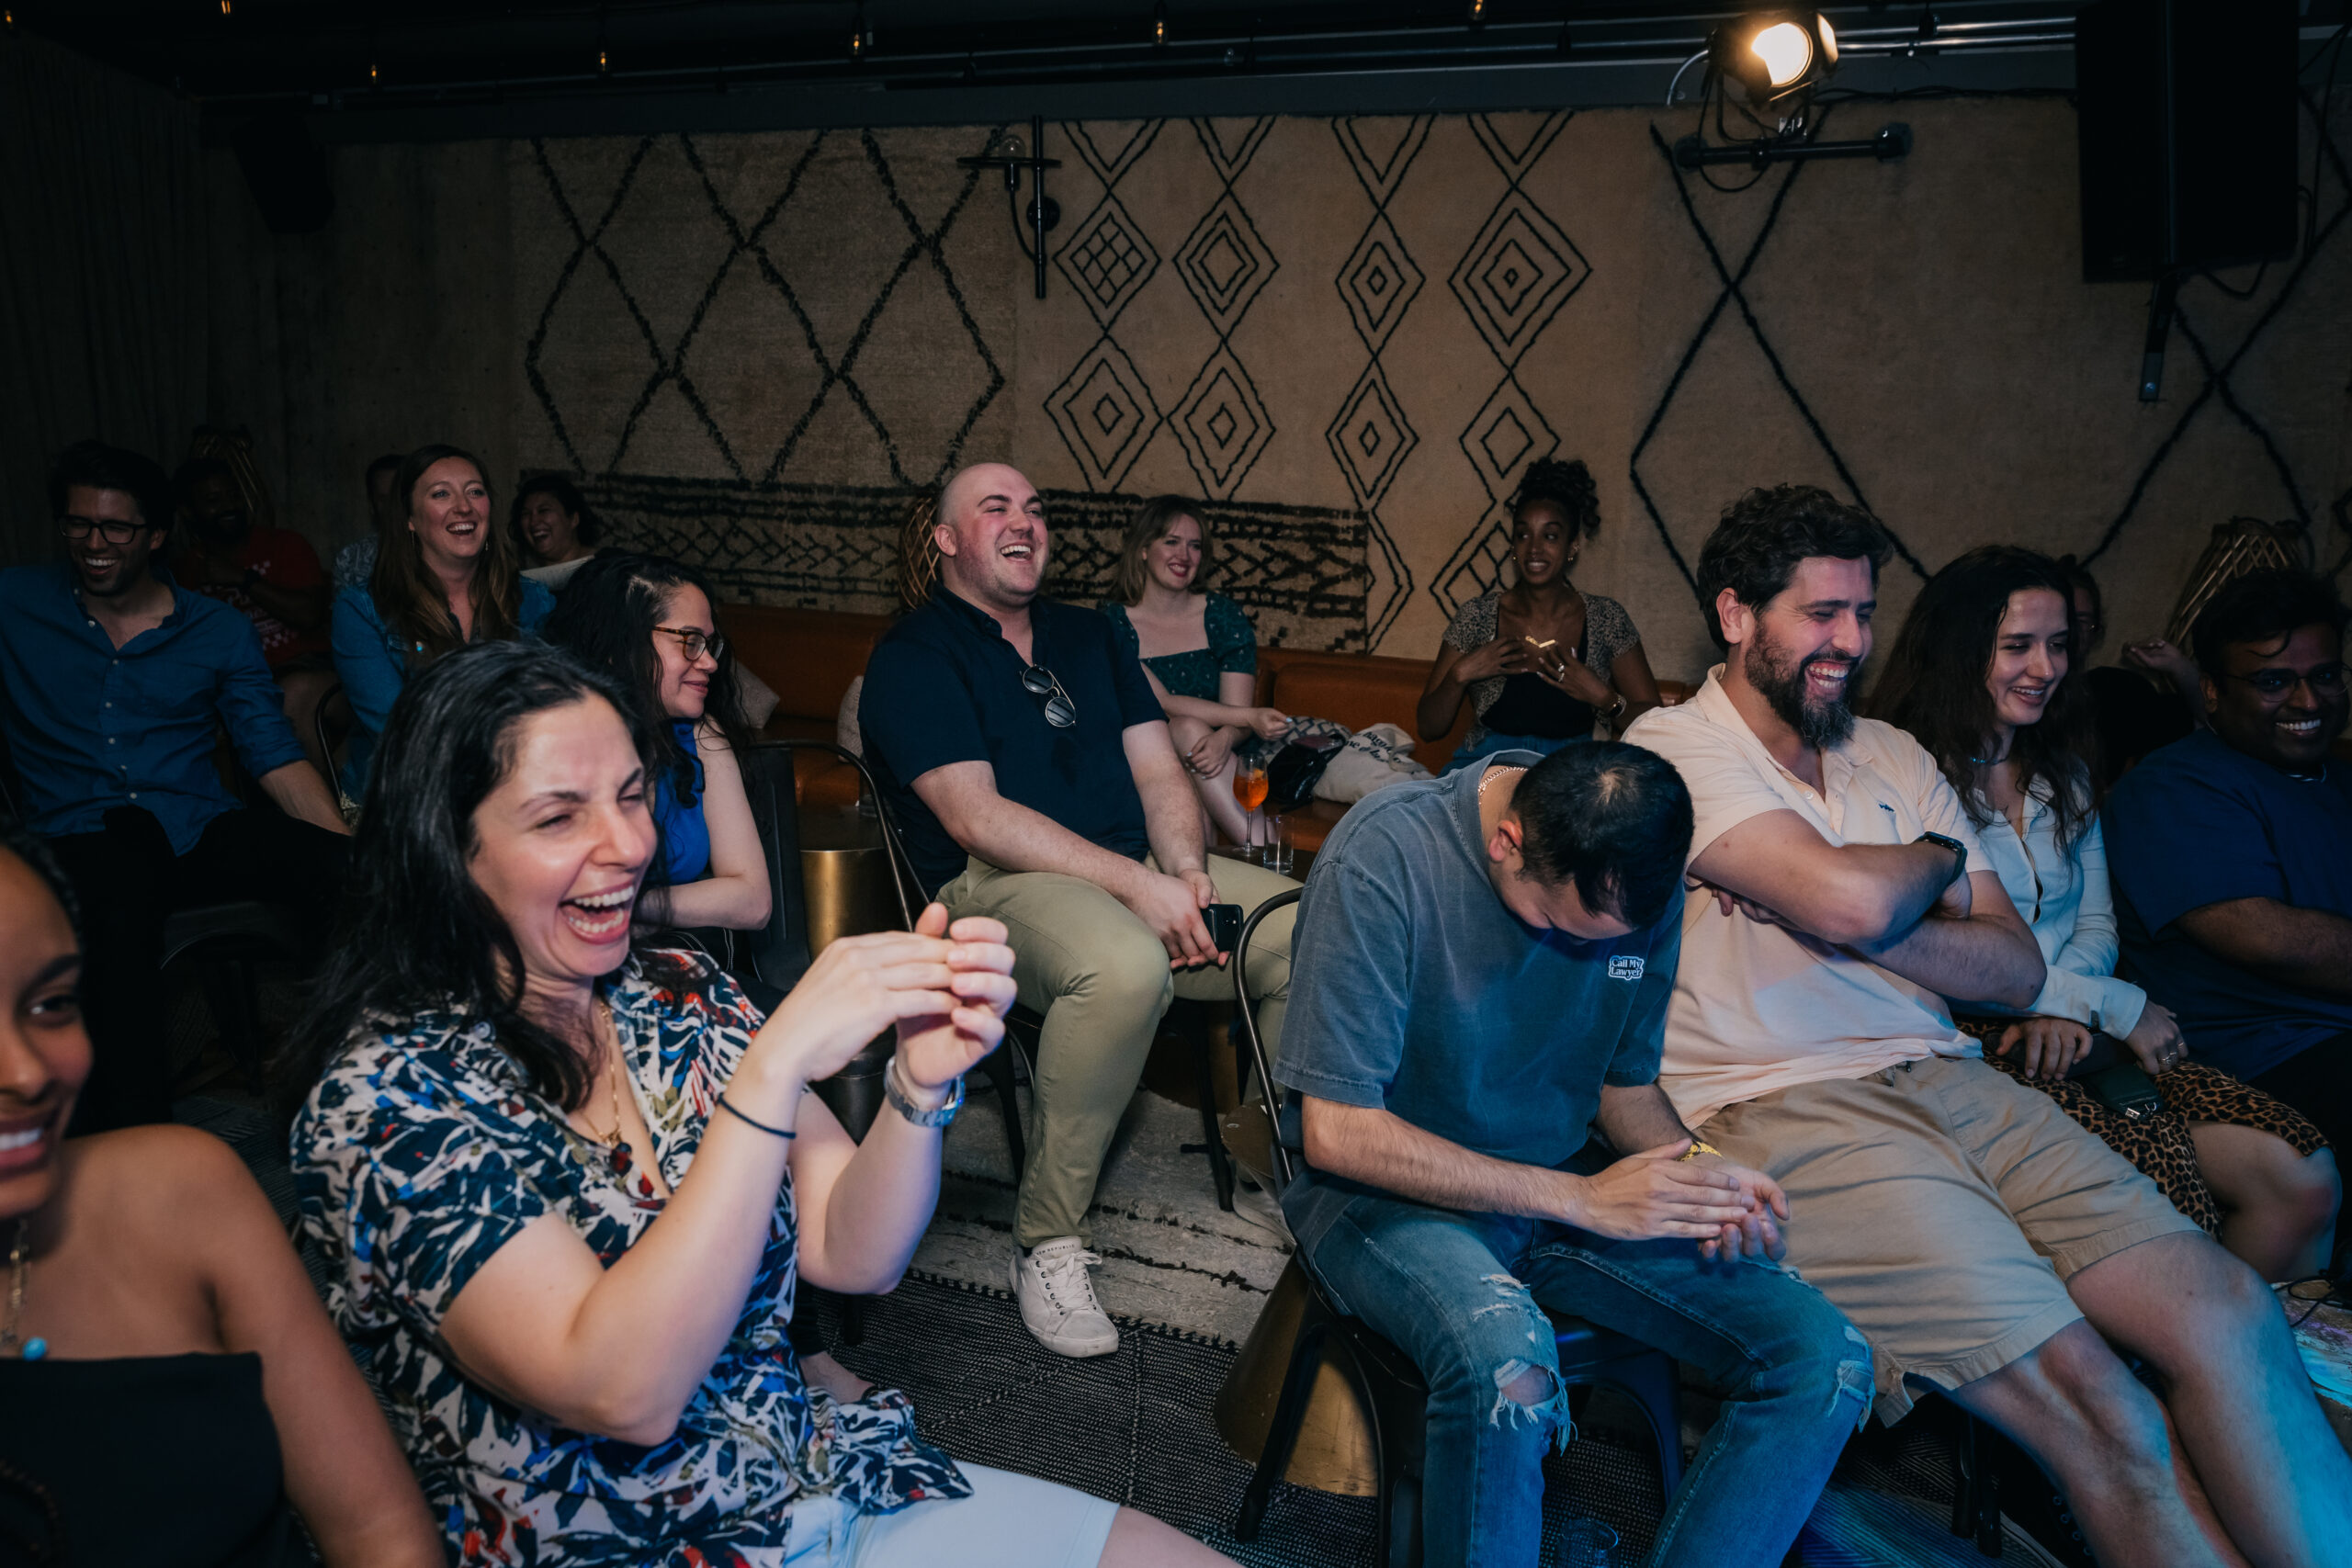 People laughing at a comedy show